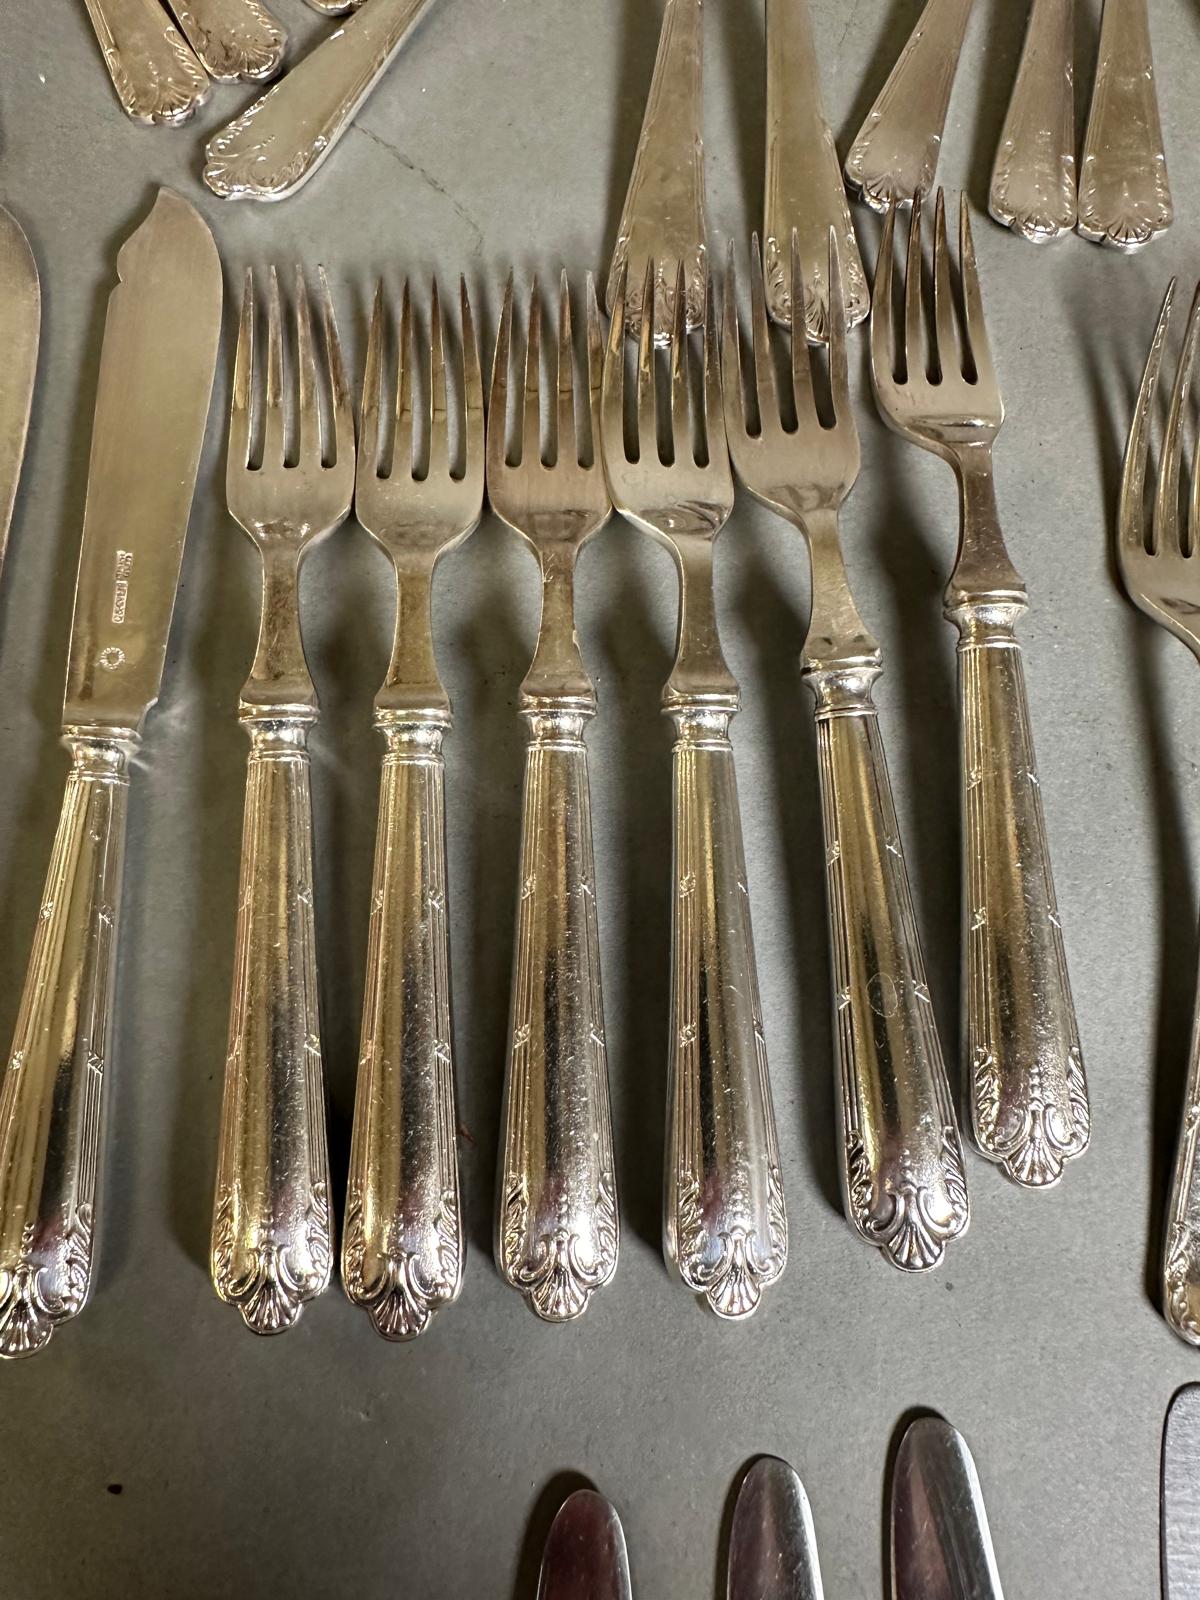 A Garard & Co six place setting silverplated cutlery service in original box. - Image 3 of 7